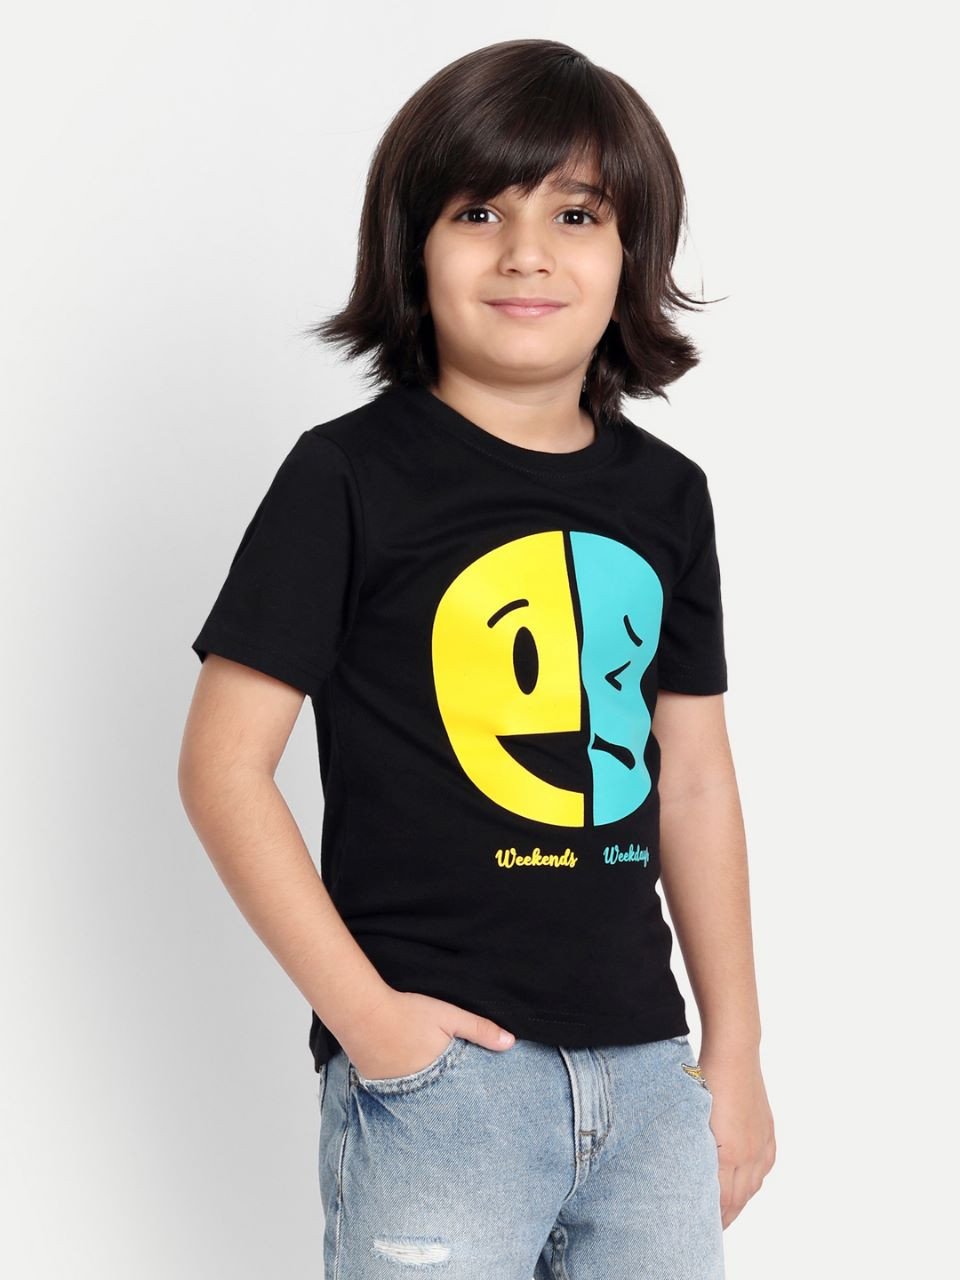 Blackbird Collection's Stylish Regular Fit Round Neck Half Sleeve Image Printed Cotton T-Shirt For Girls - Black Colour